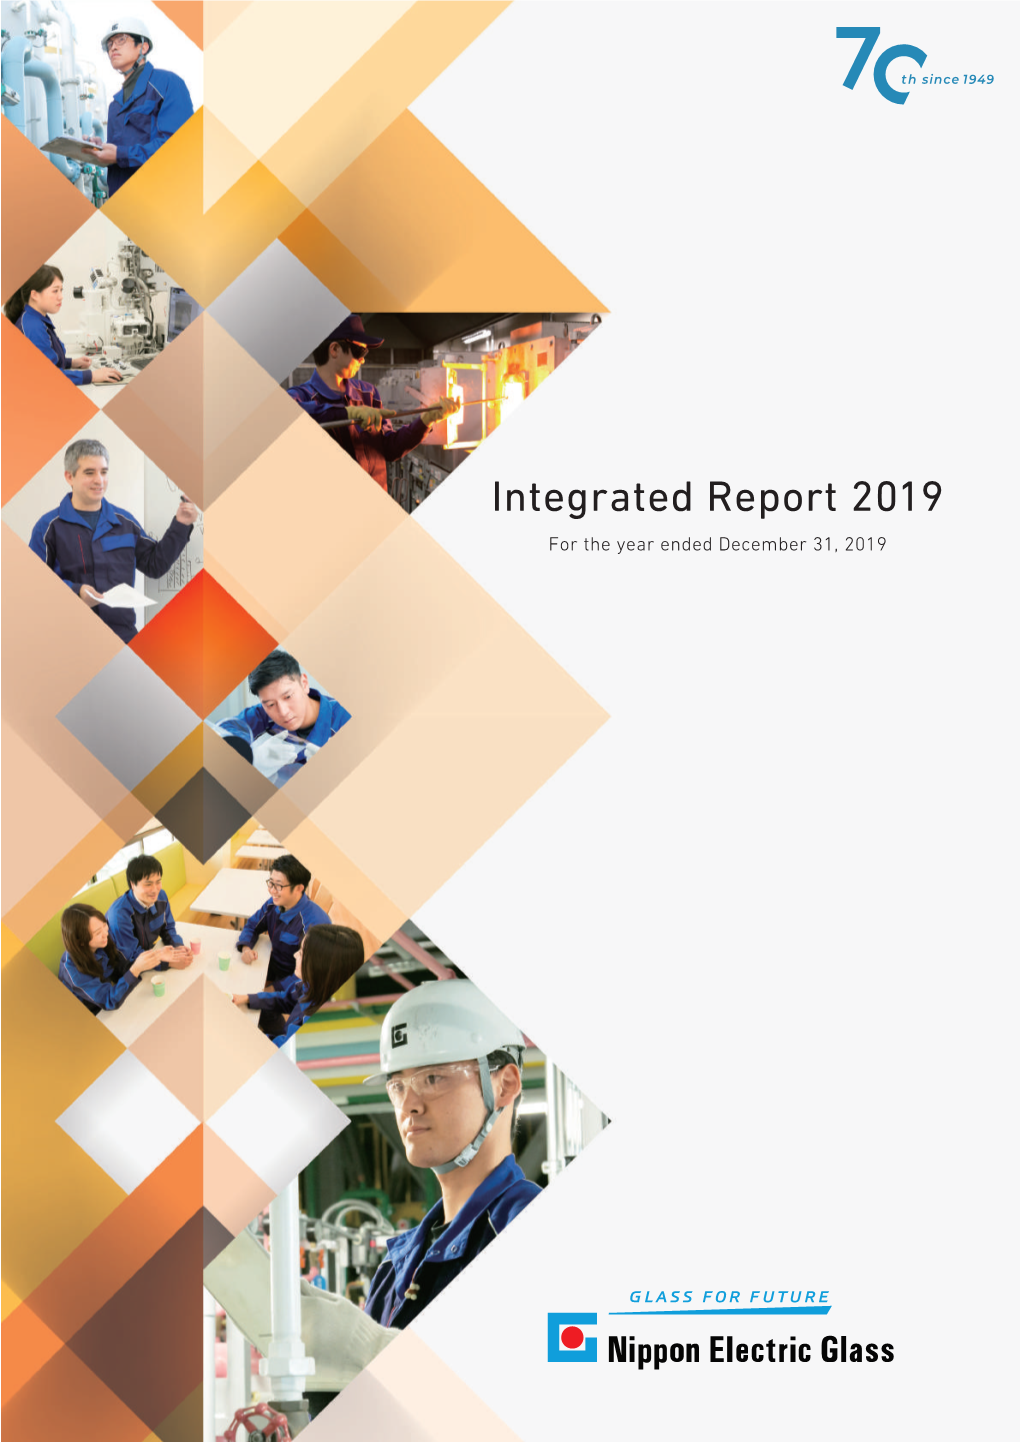 Integrated Report 2019 for the Year Ended December 31, 2019 on the Publication of the Integrated Report 2019